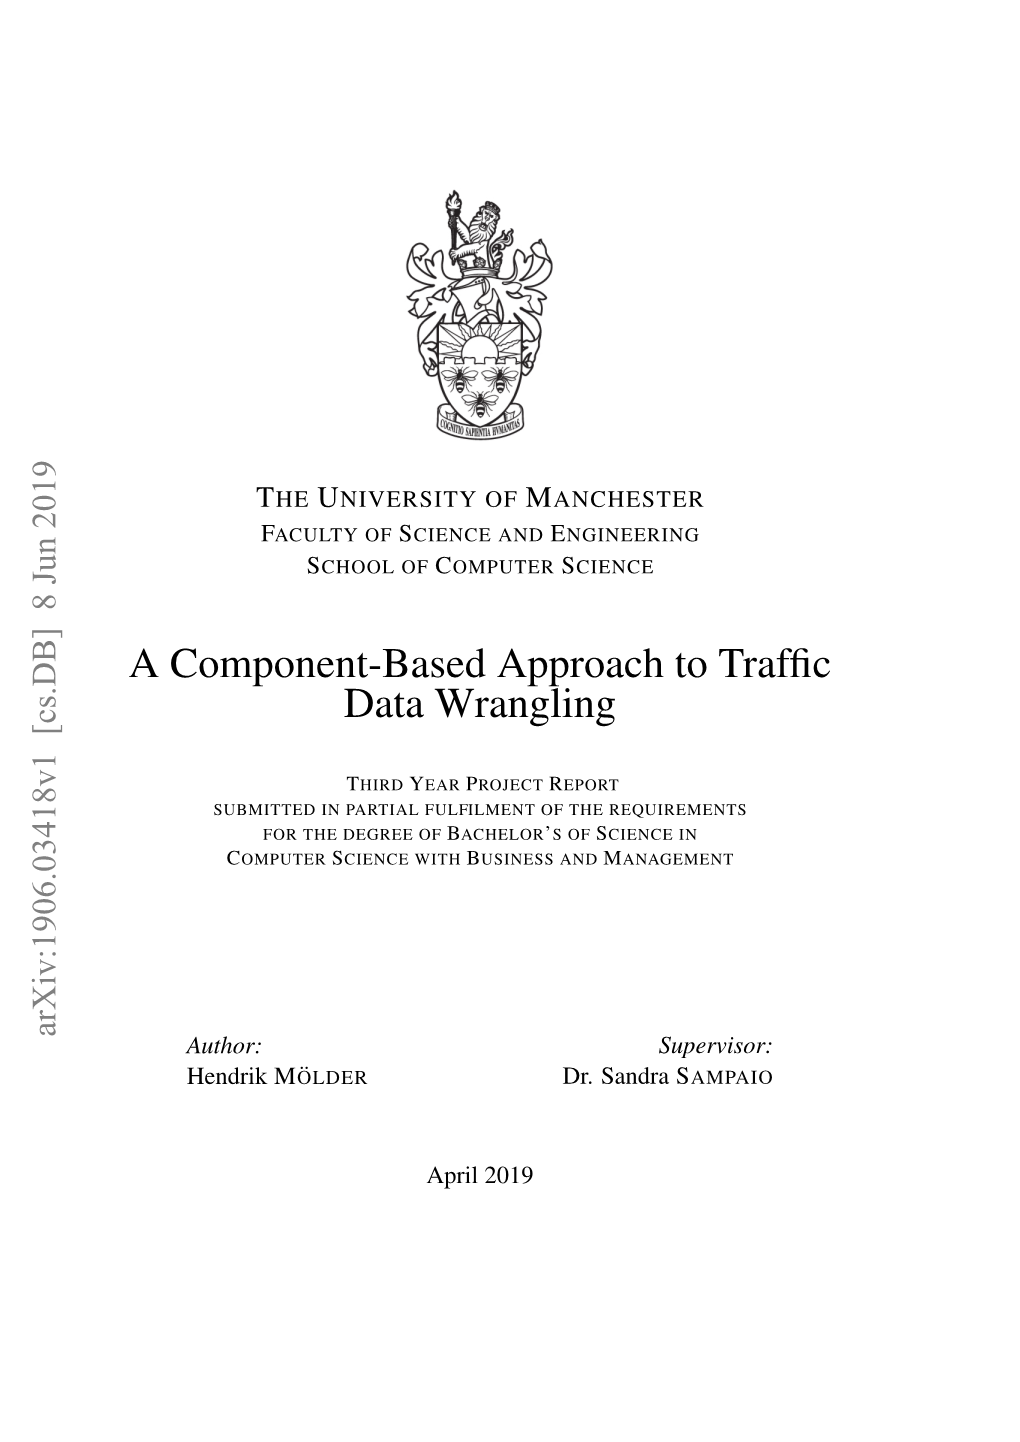 A Component-Based Approach to Traffic Data Wrangling